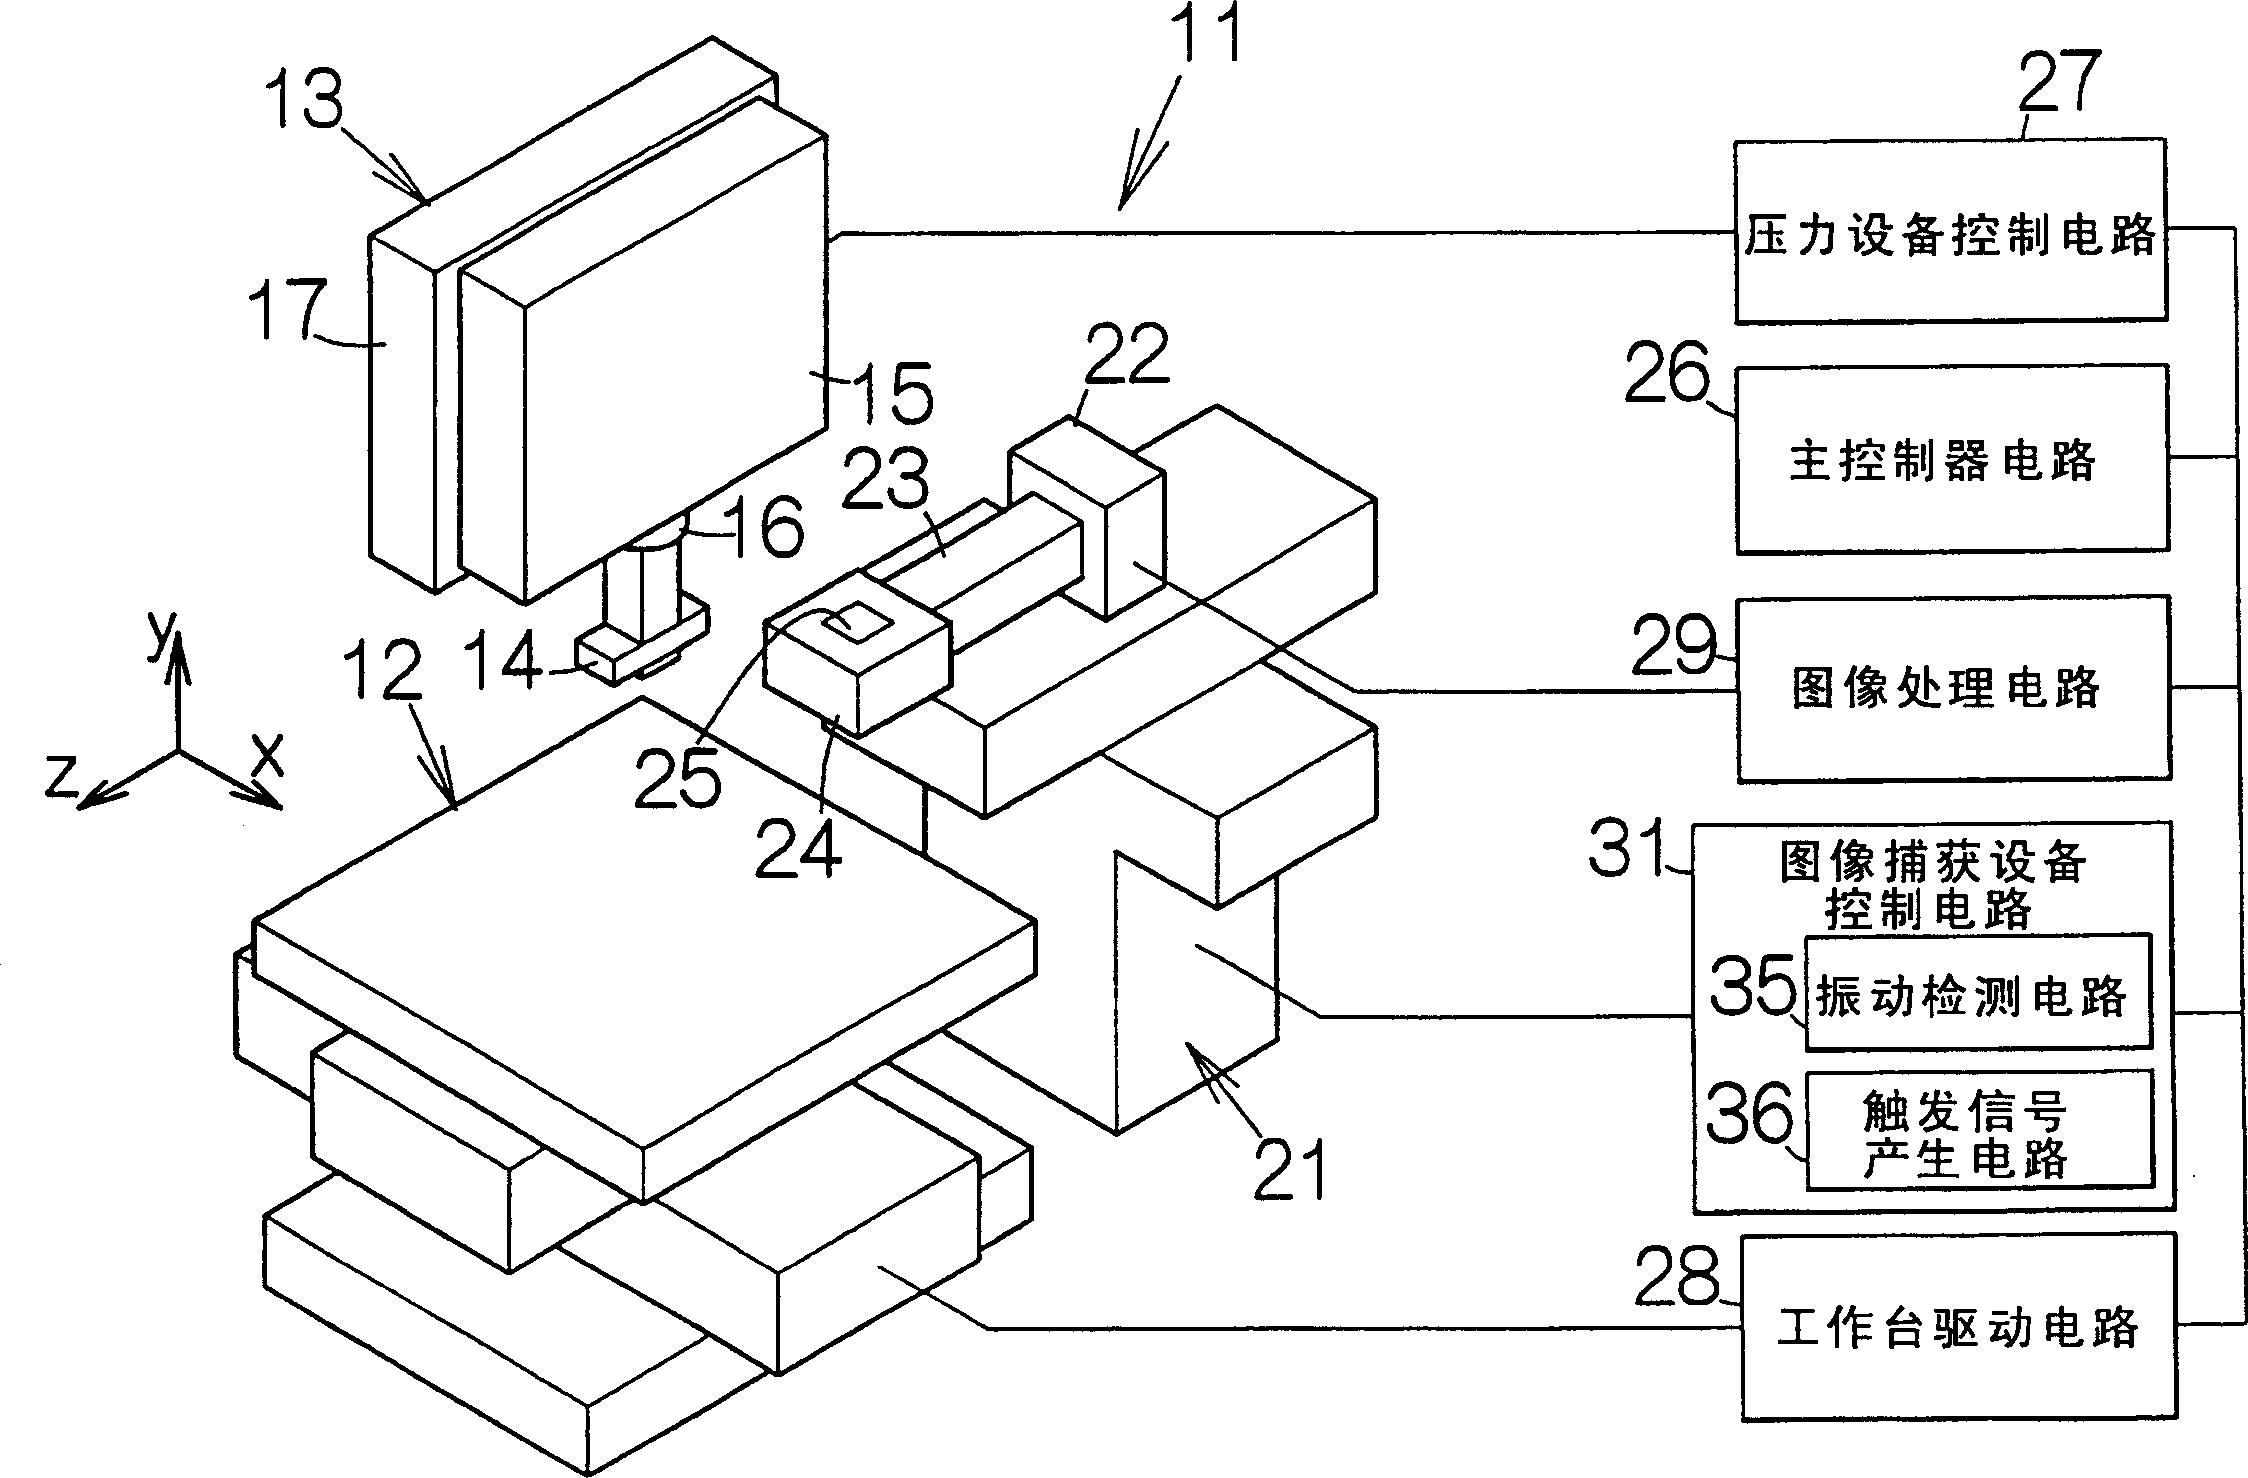 Positioning apparatus and method of controlling positioning apparatus